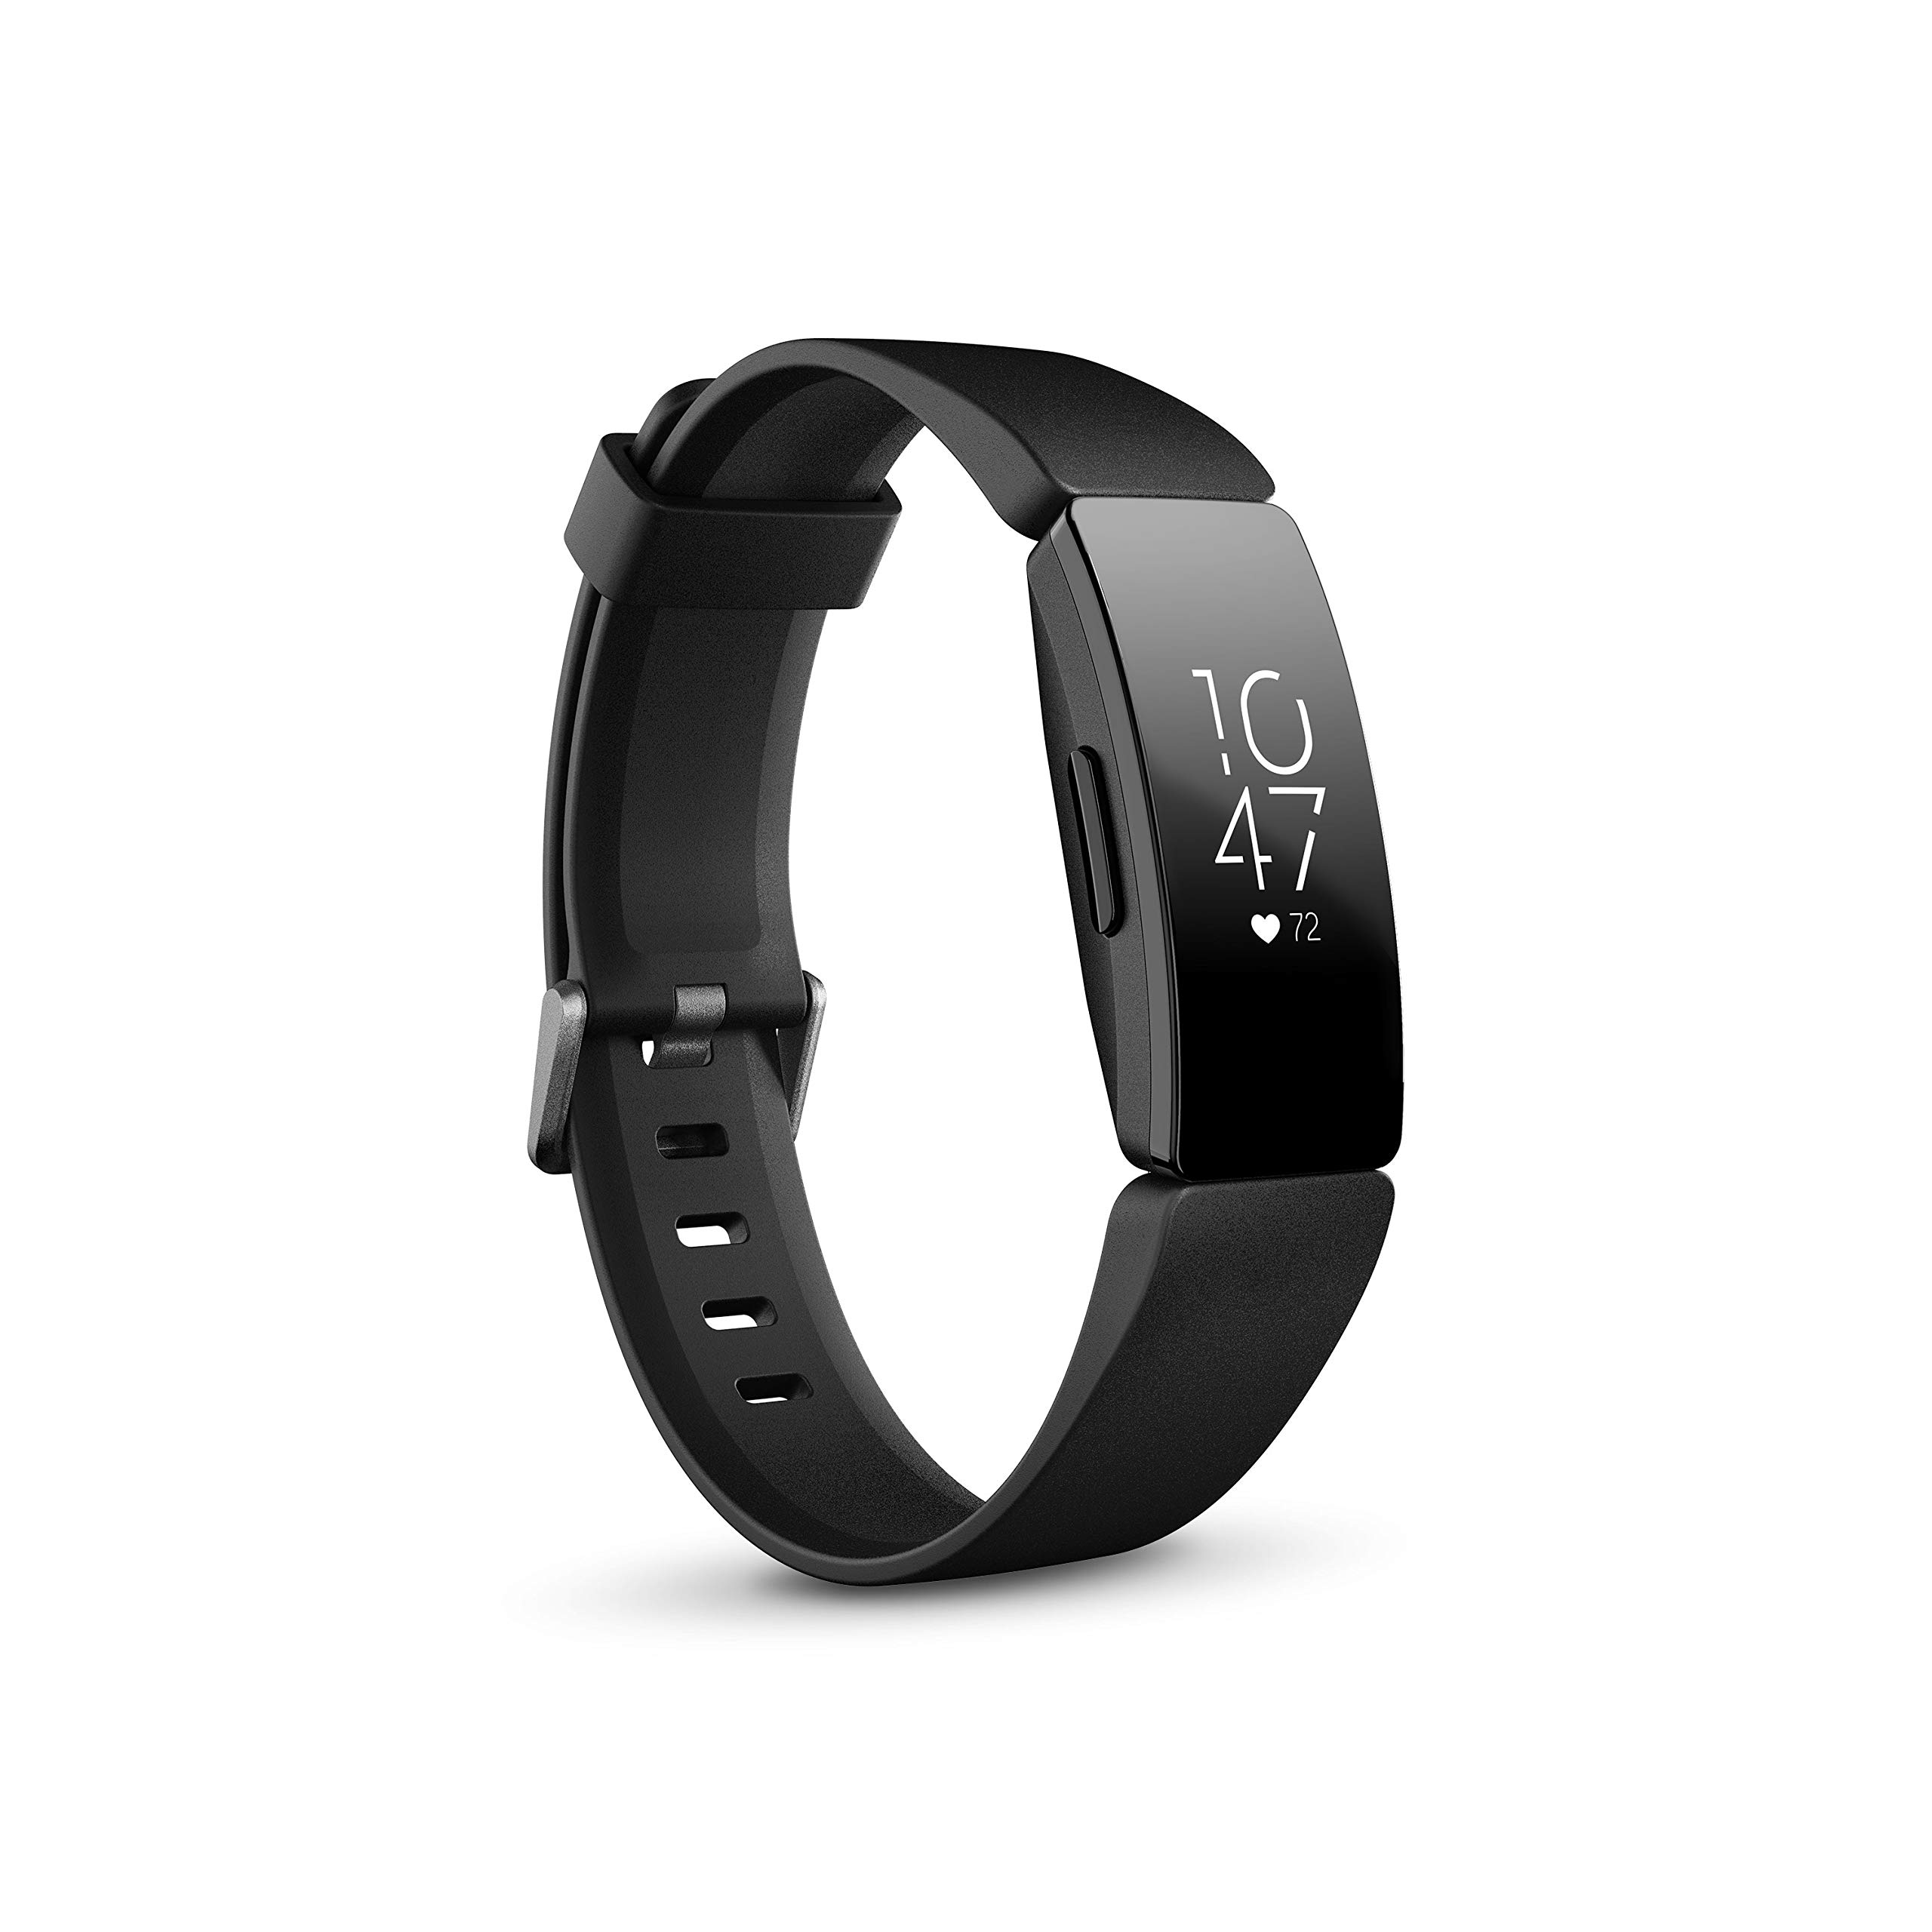 Fitbit Inspire HR Fitness Tracker + Heart Rate, Black, Small and Large Wristbands - image 1 of 9